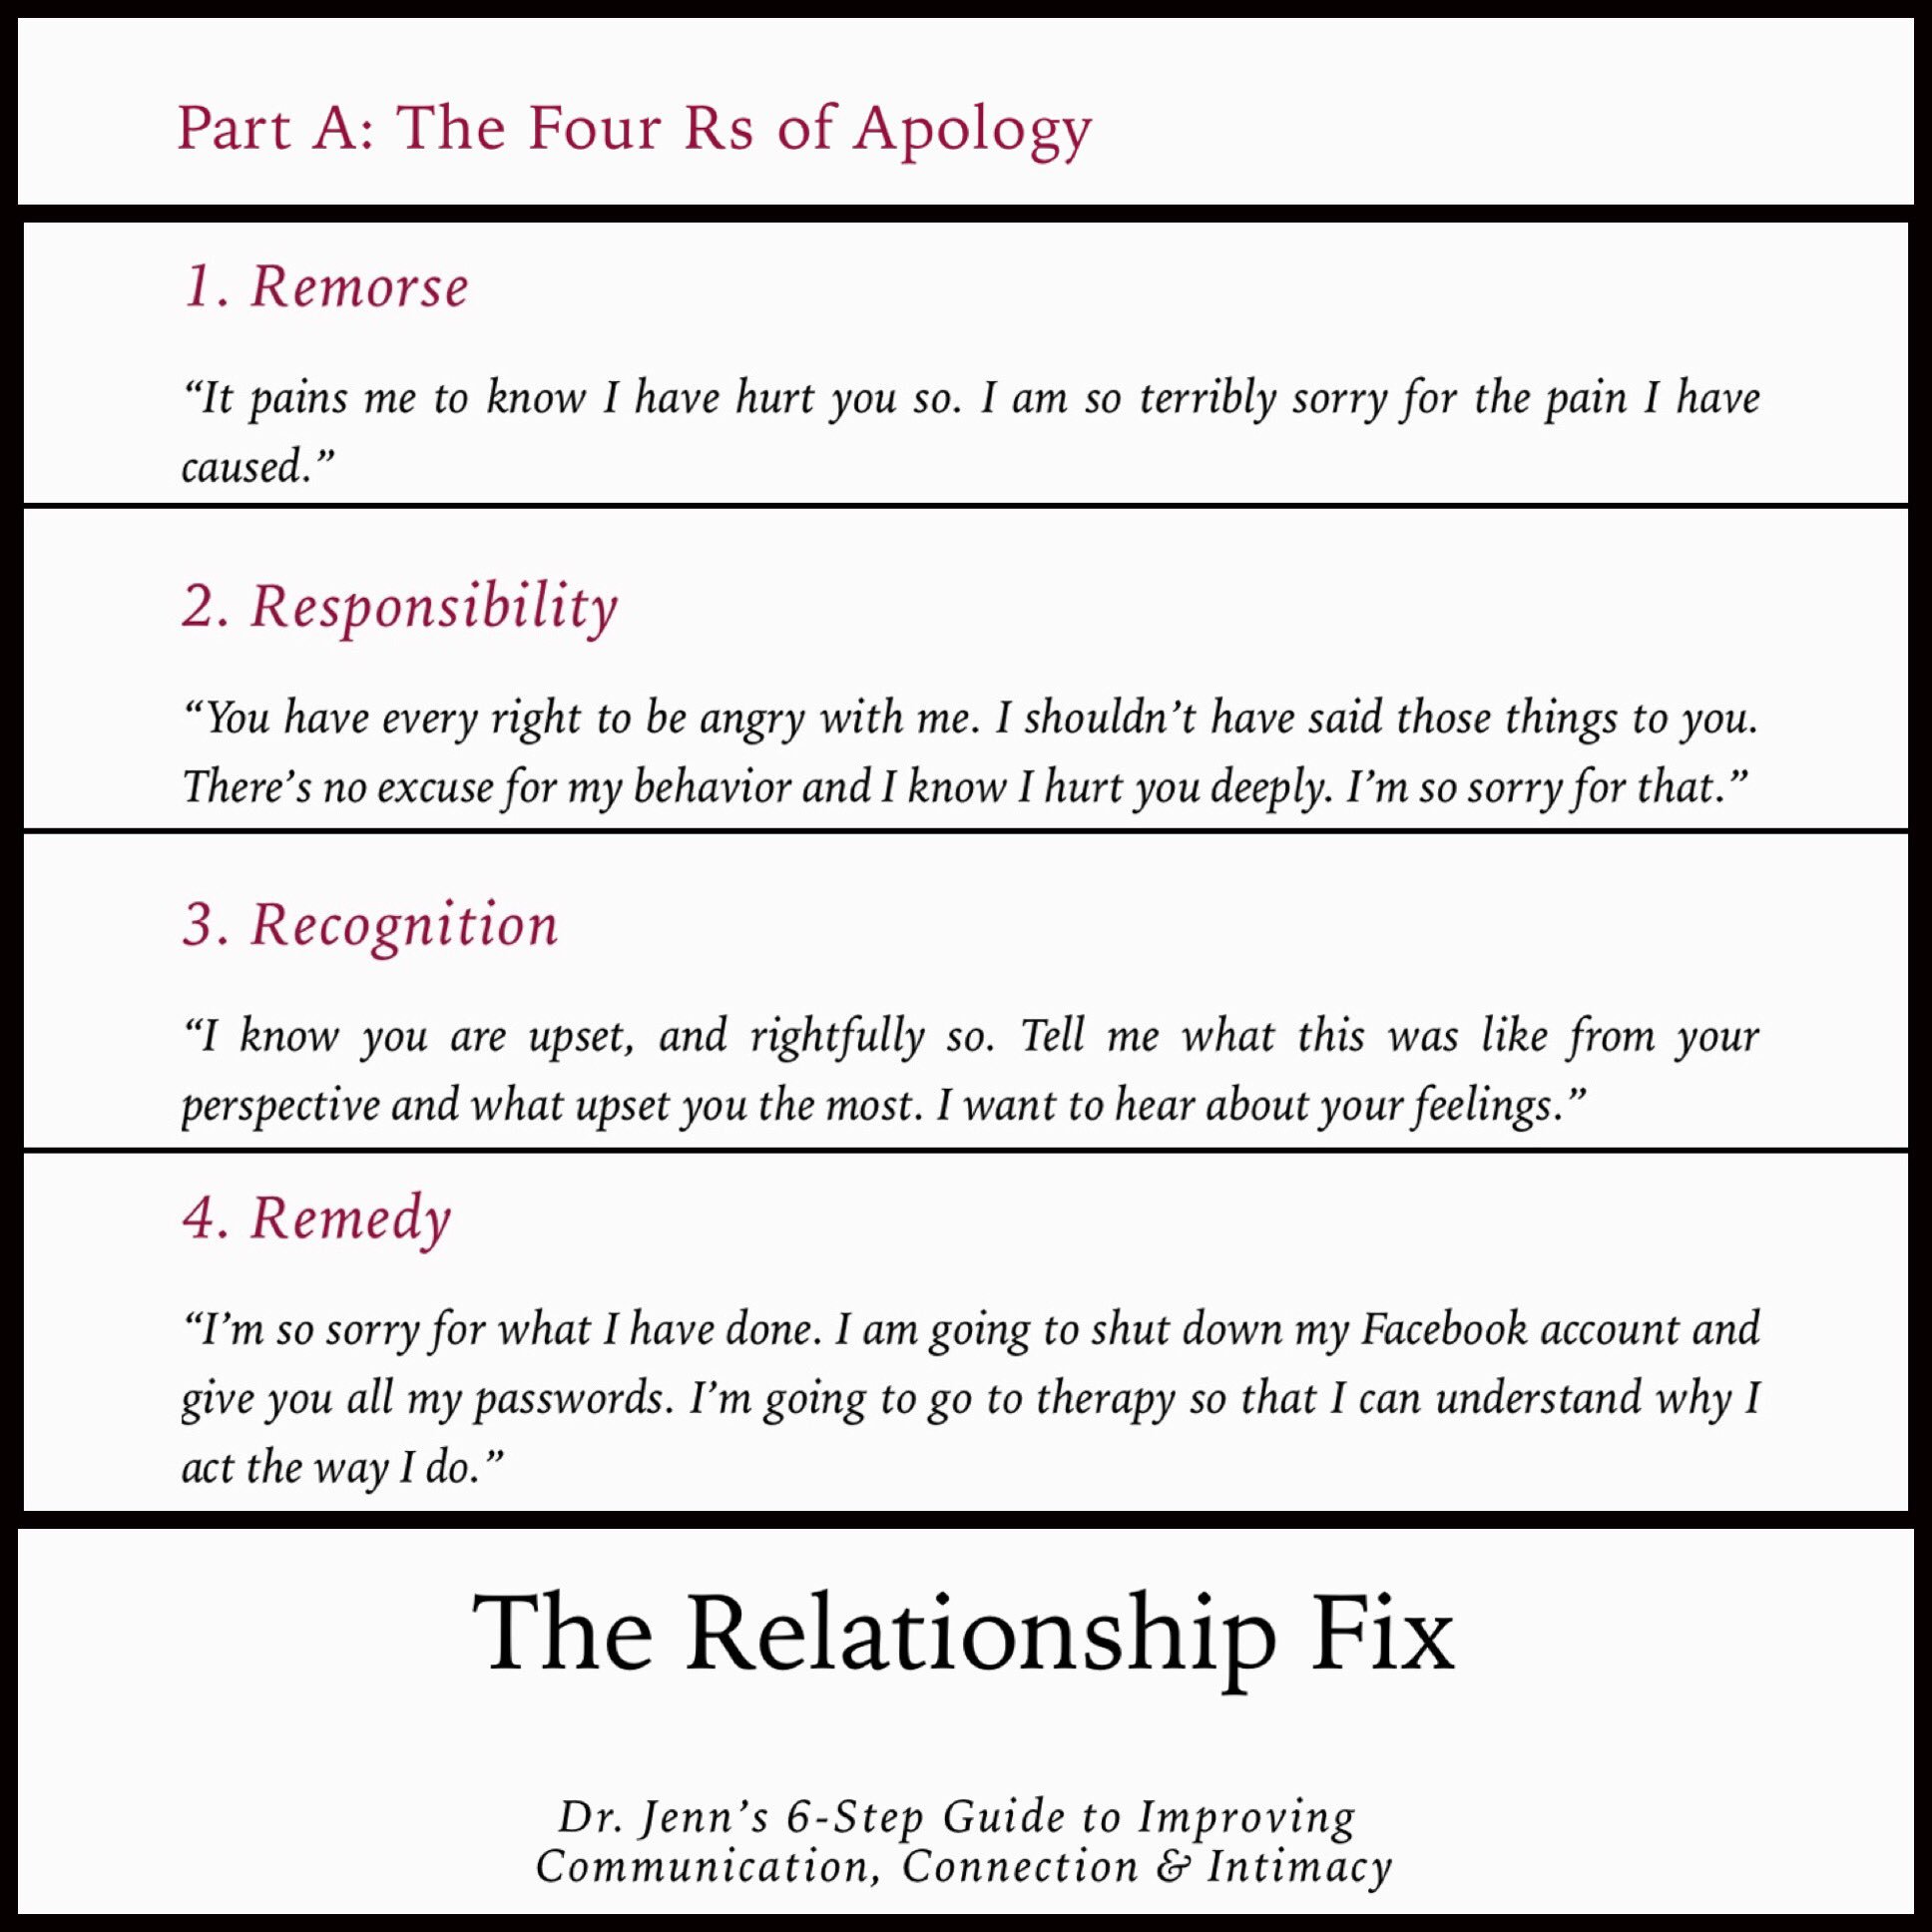 What are the 5 R's of apology?